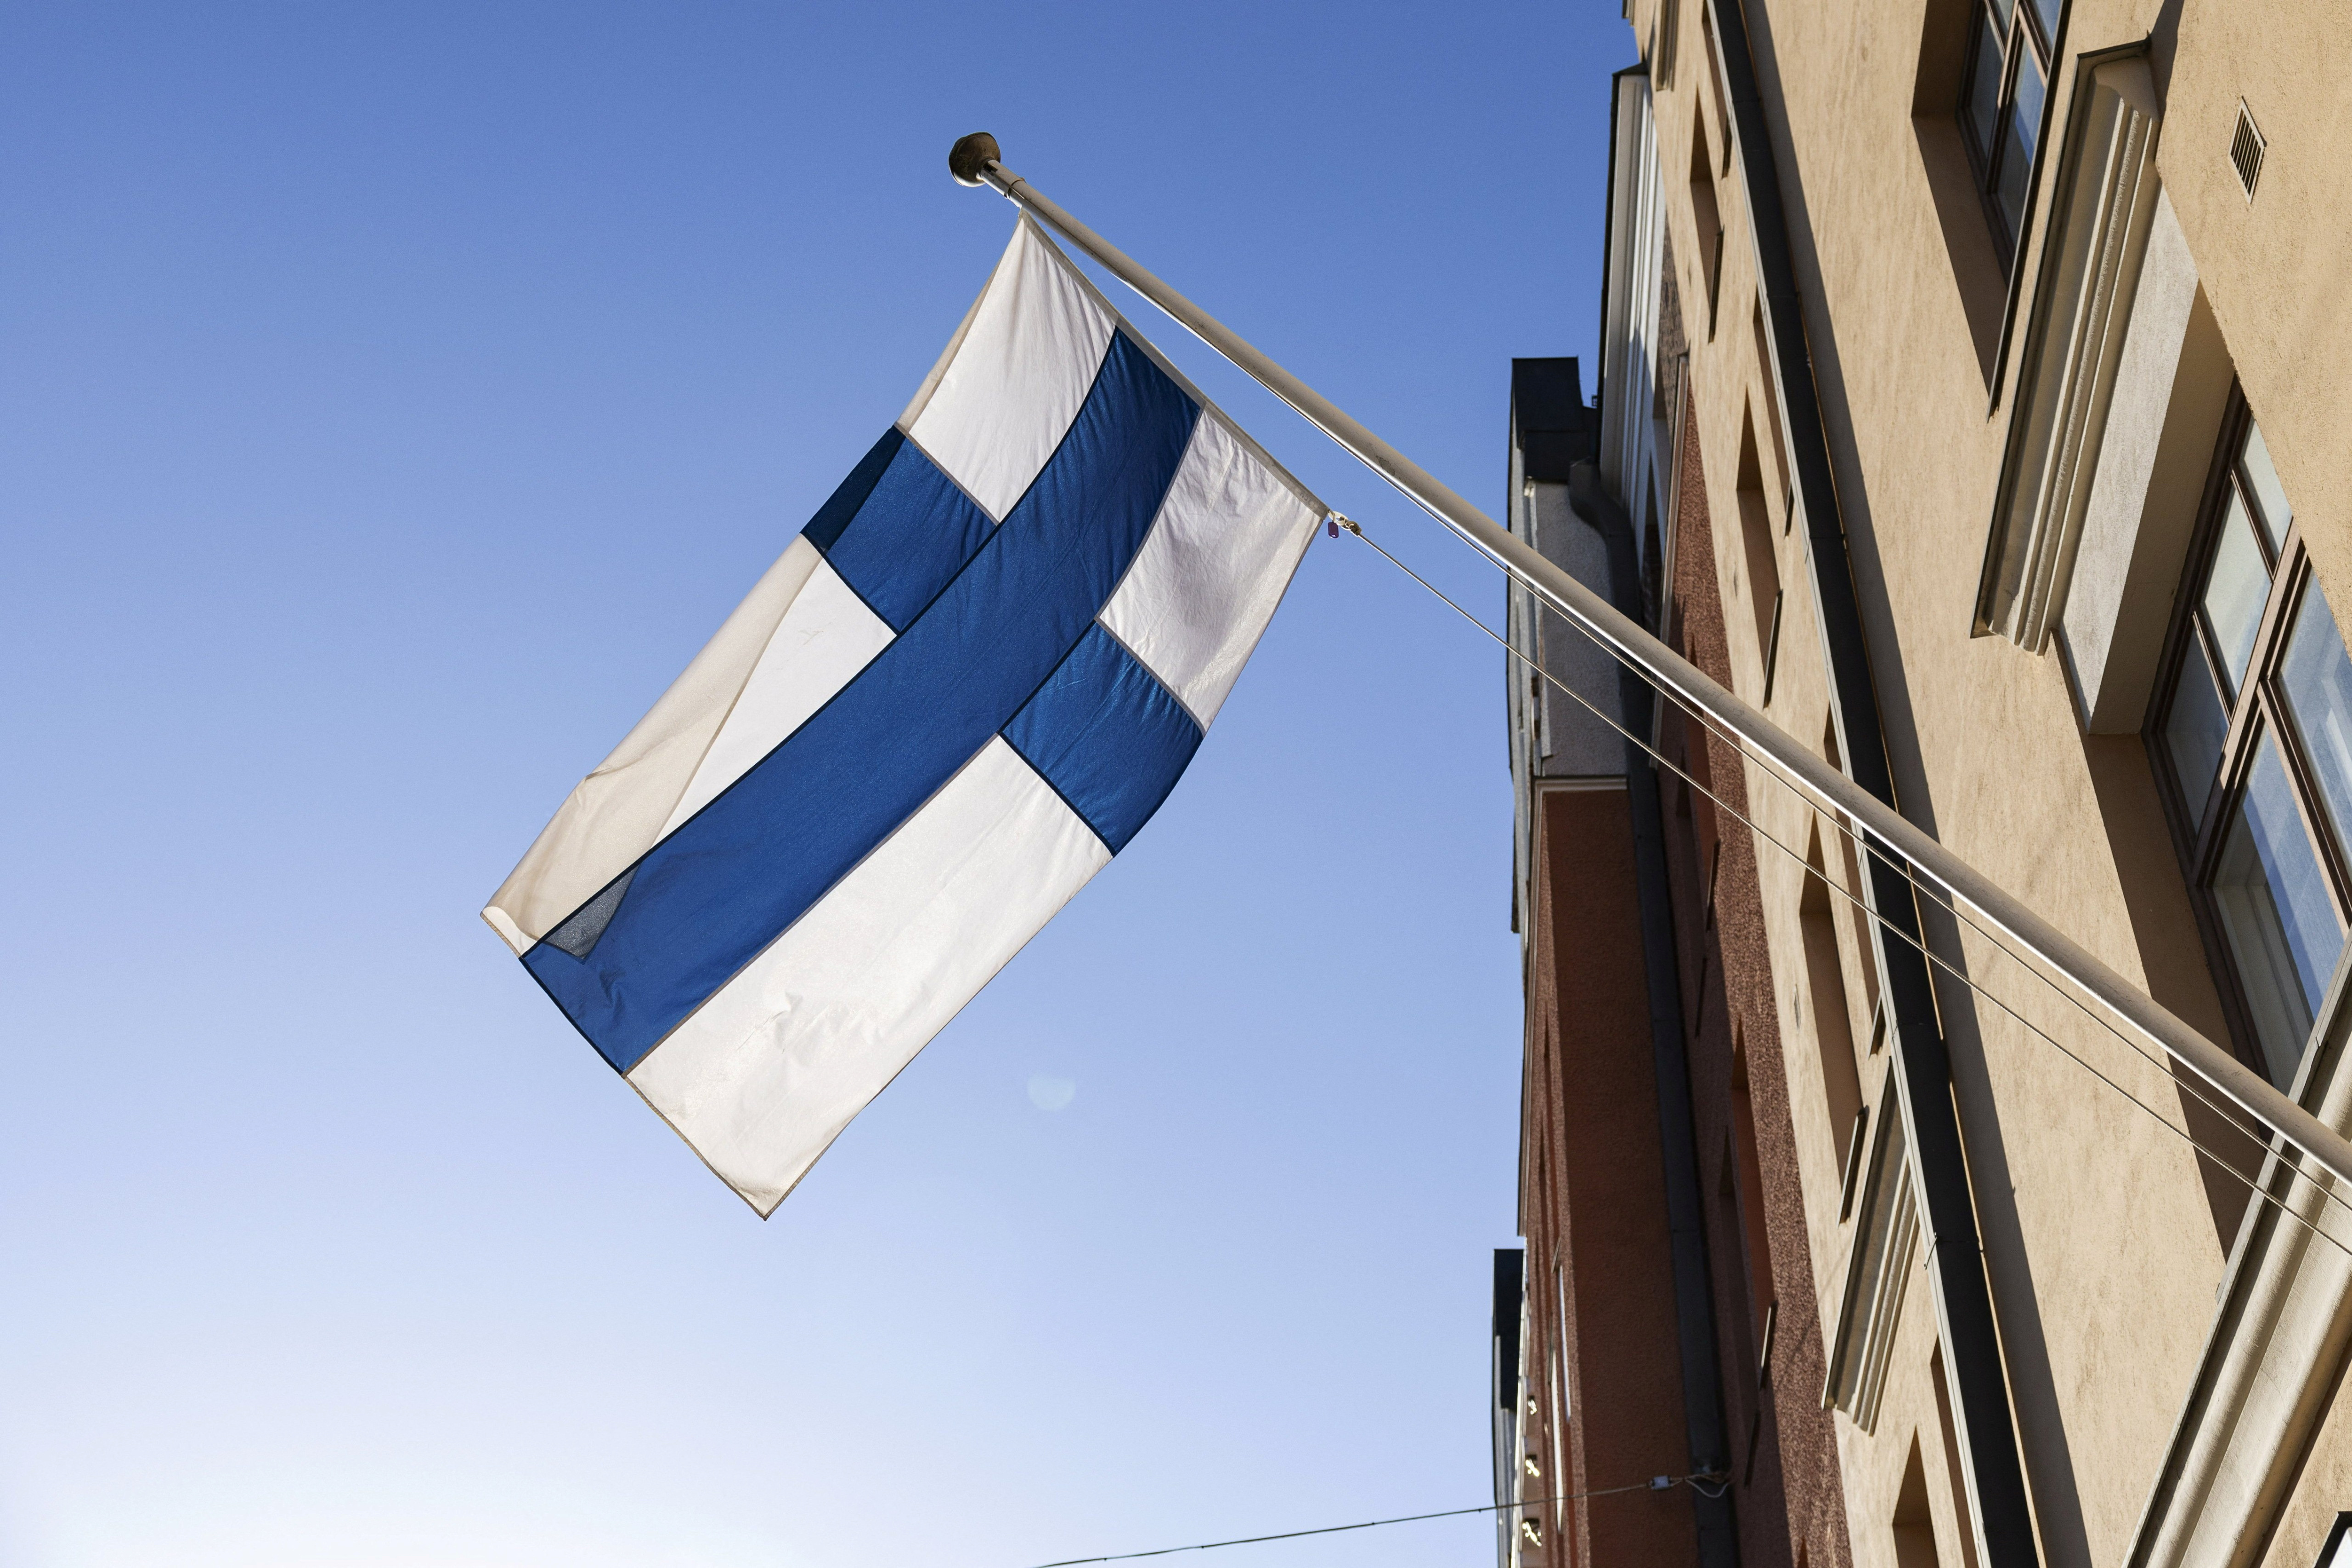 Parliamentary elections in Finland